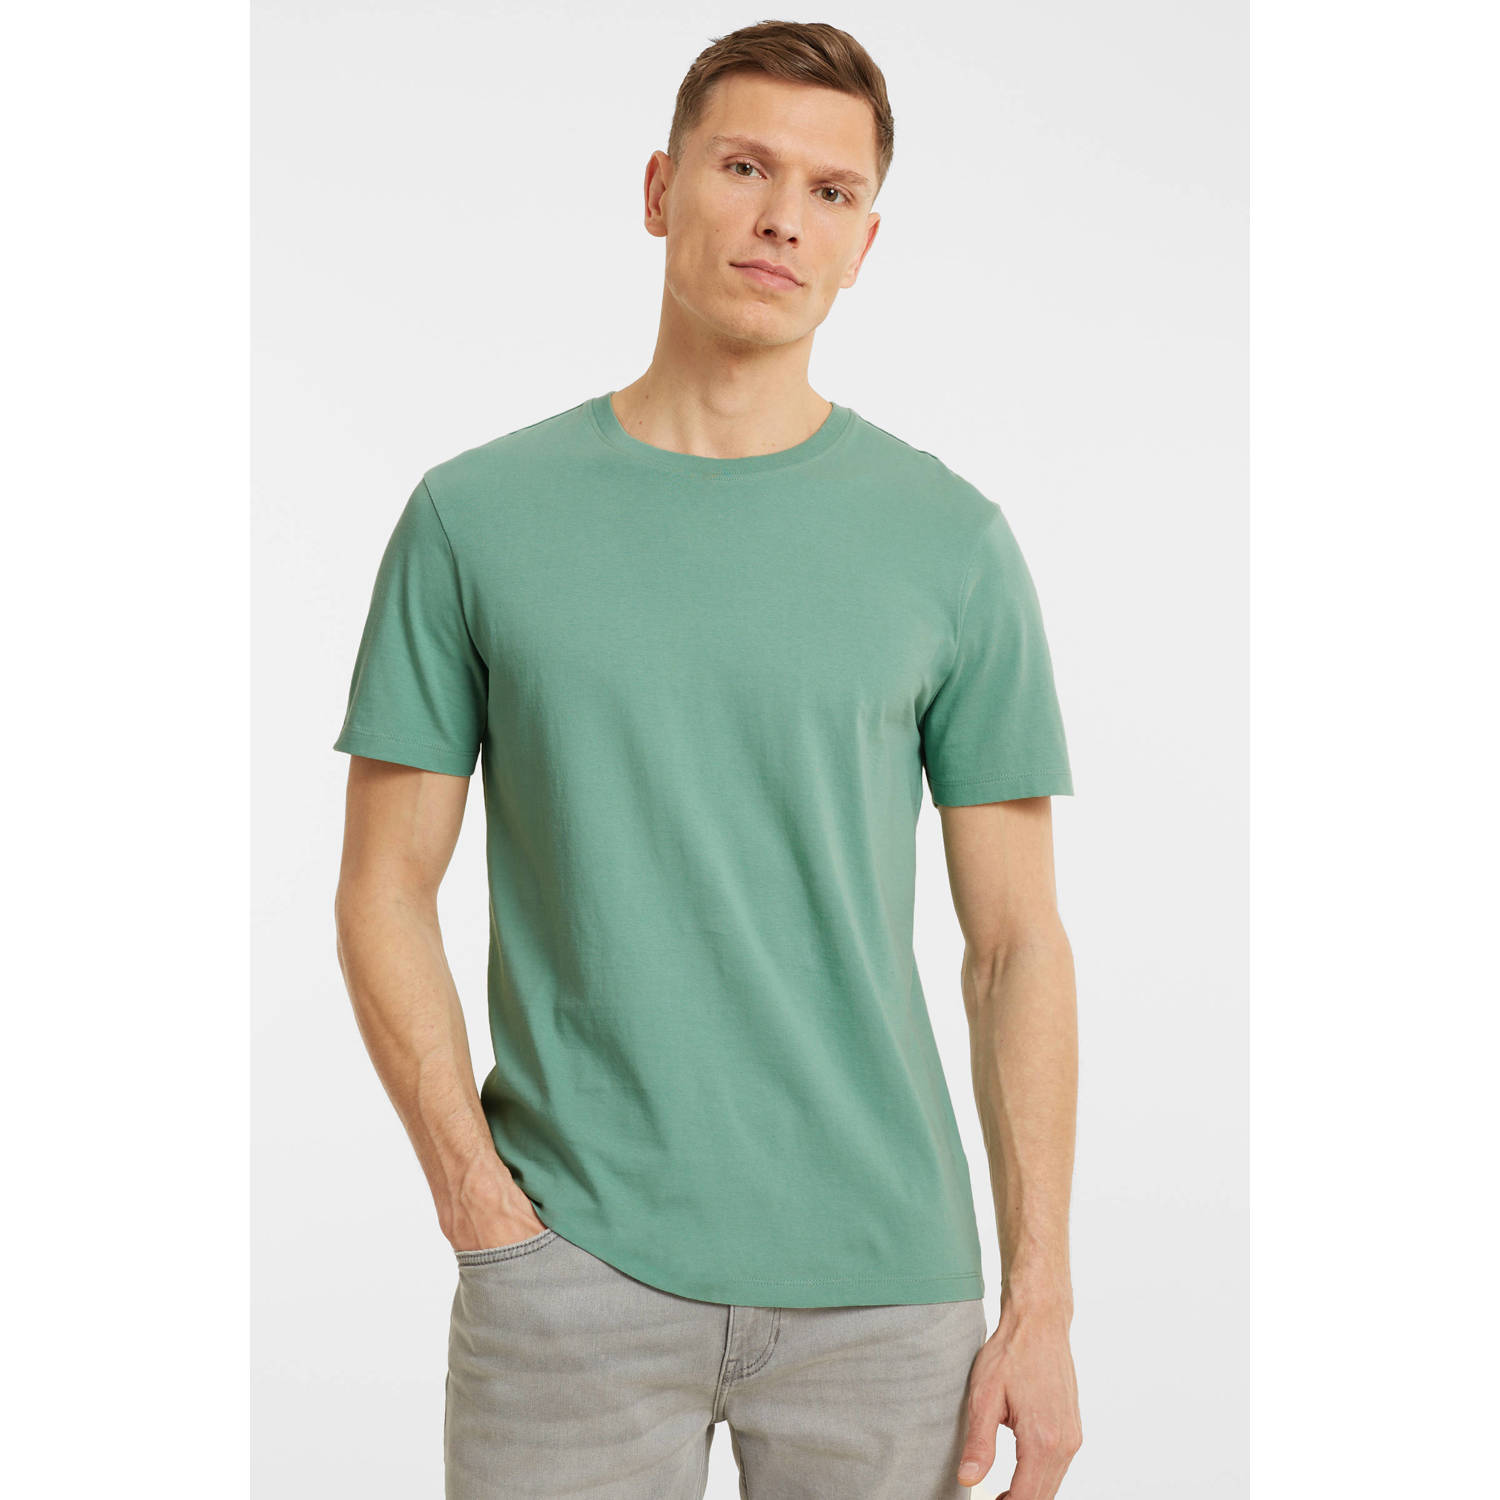 anytime T-shirt teal